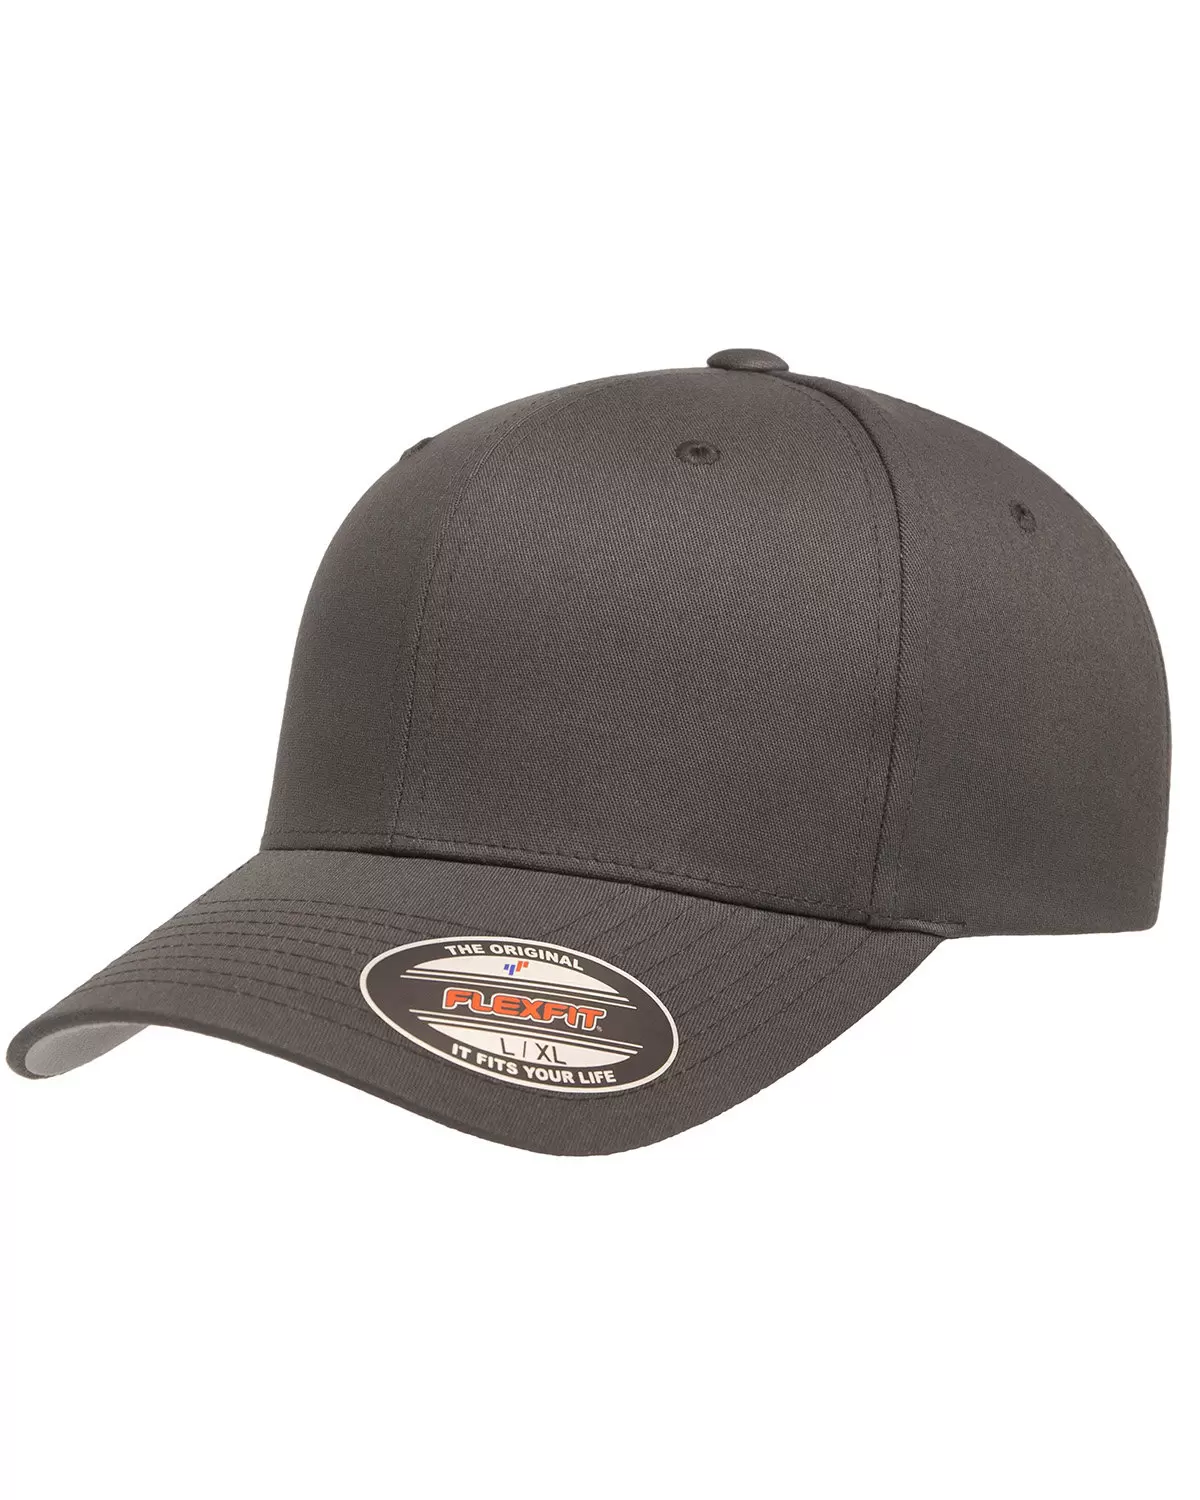 Flexfit 5001 V-Flex Twill / Structured Mid-Profile 6-Panel - From